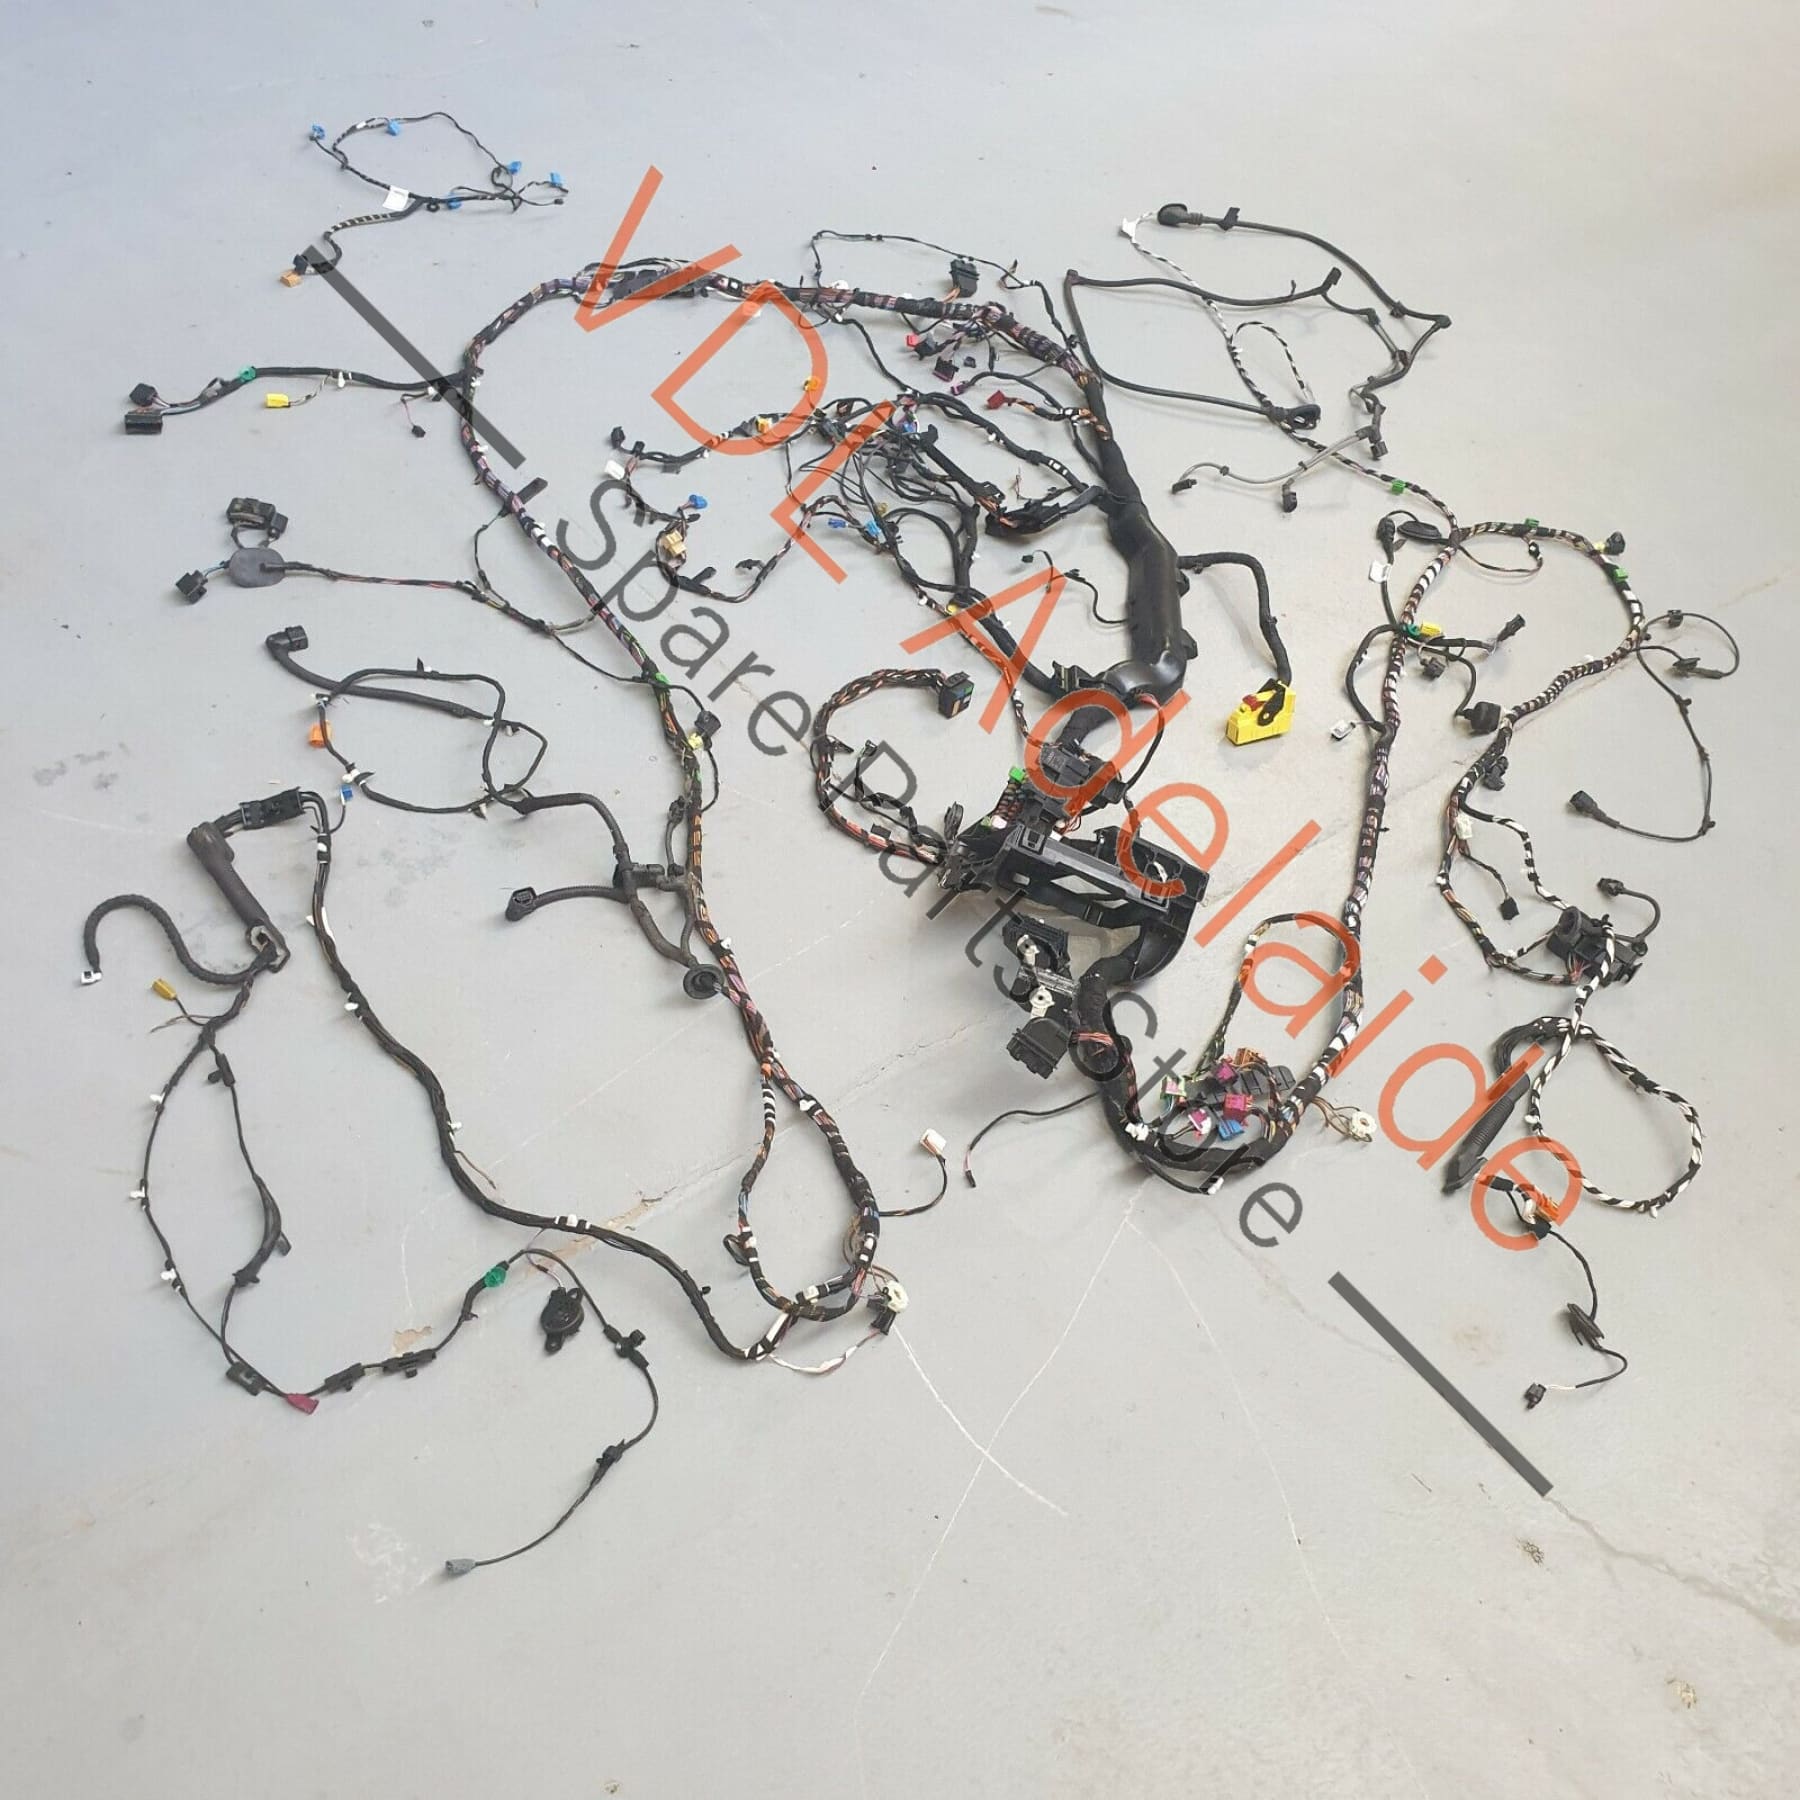 Volkswagen VW Golf R Mk7 Interior Cabin Body Central Wiring Harness Cable Set 5G0971051